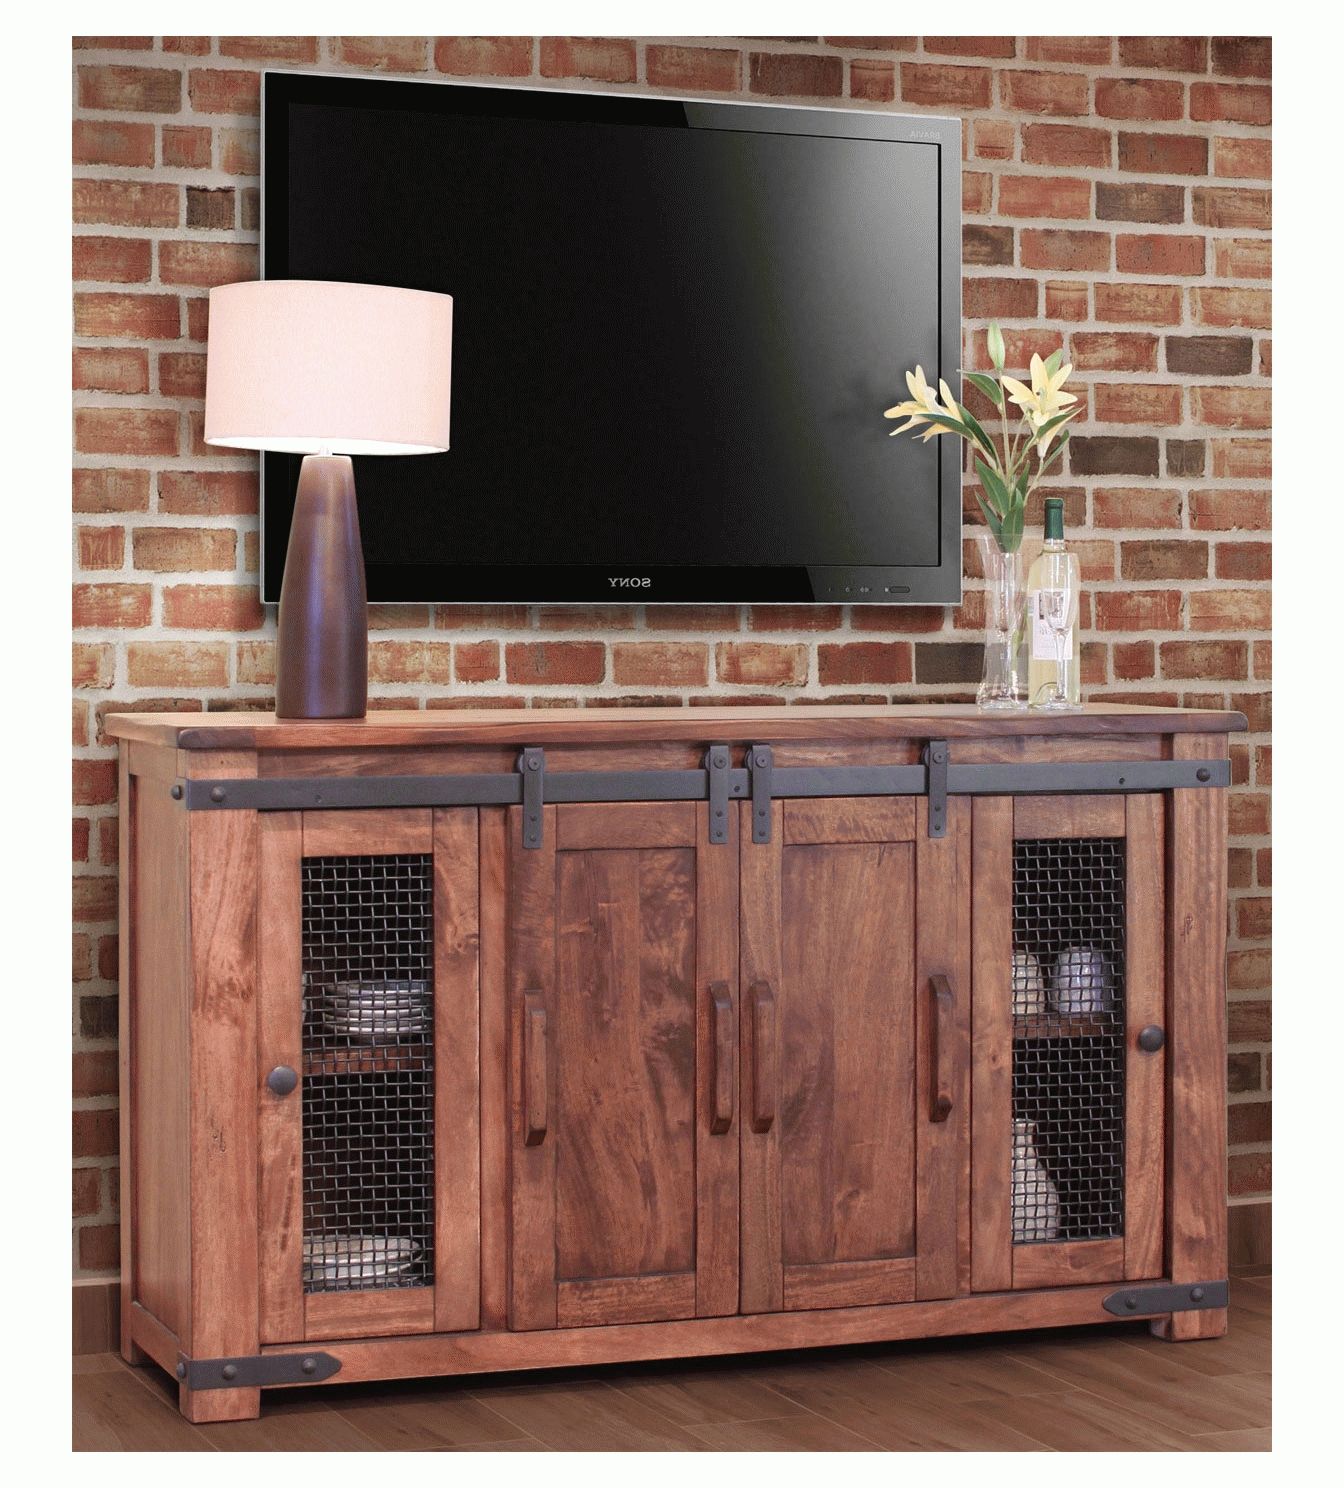 Rustic Barn Door Tv Stand, Barn Door Tv Stand, Barn Door Tv Console With Regard To Cabinet Tv Stands (View 5 of 15)